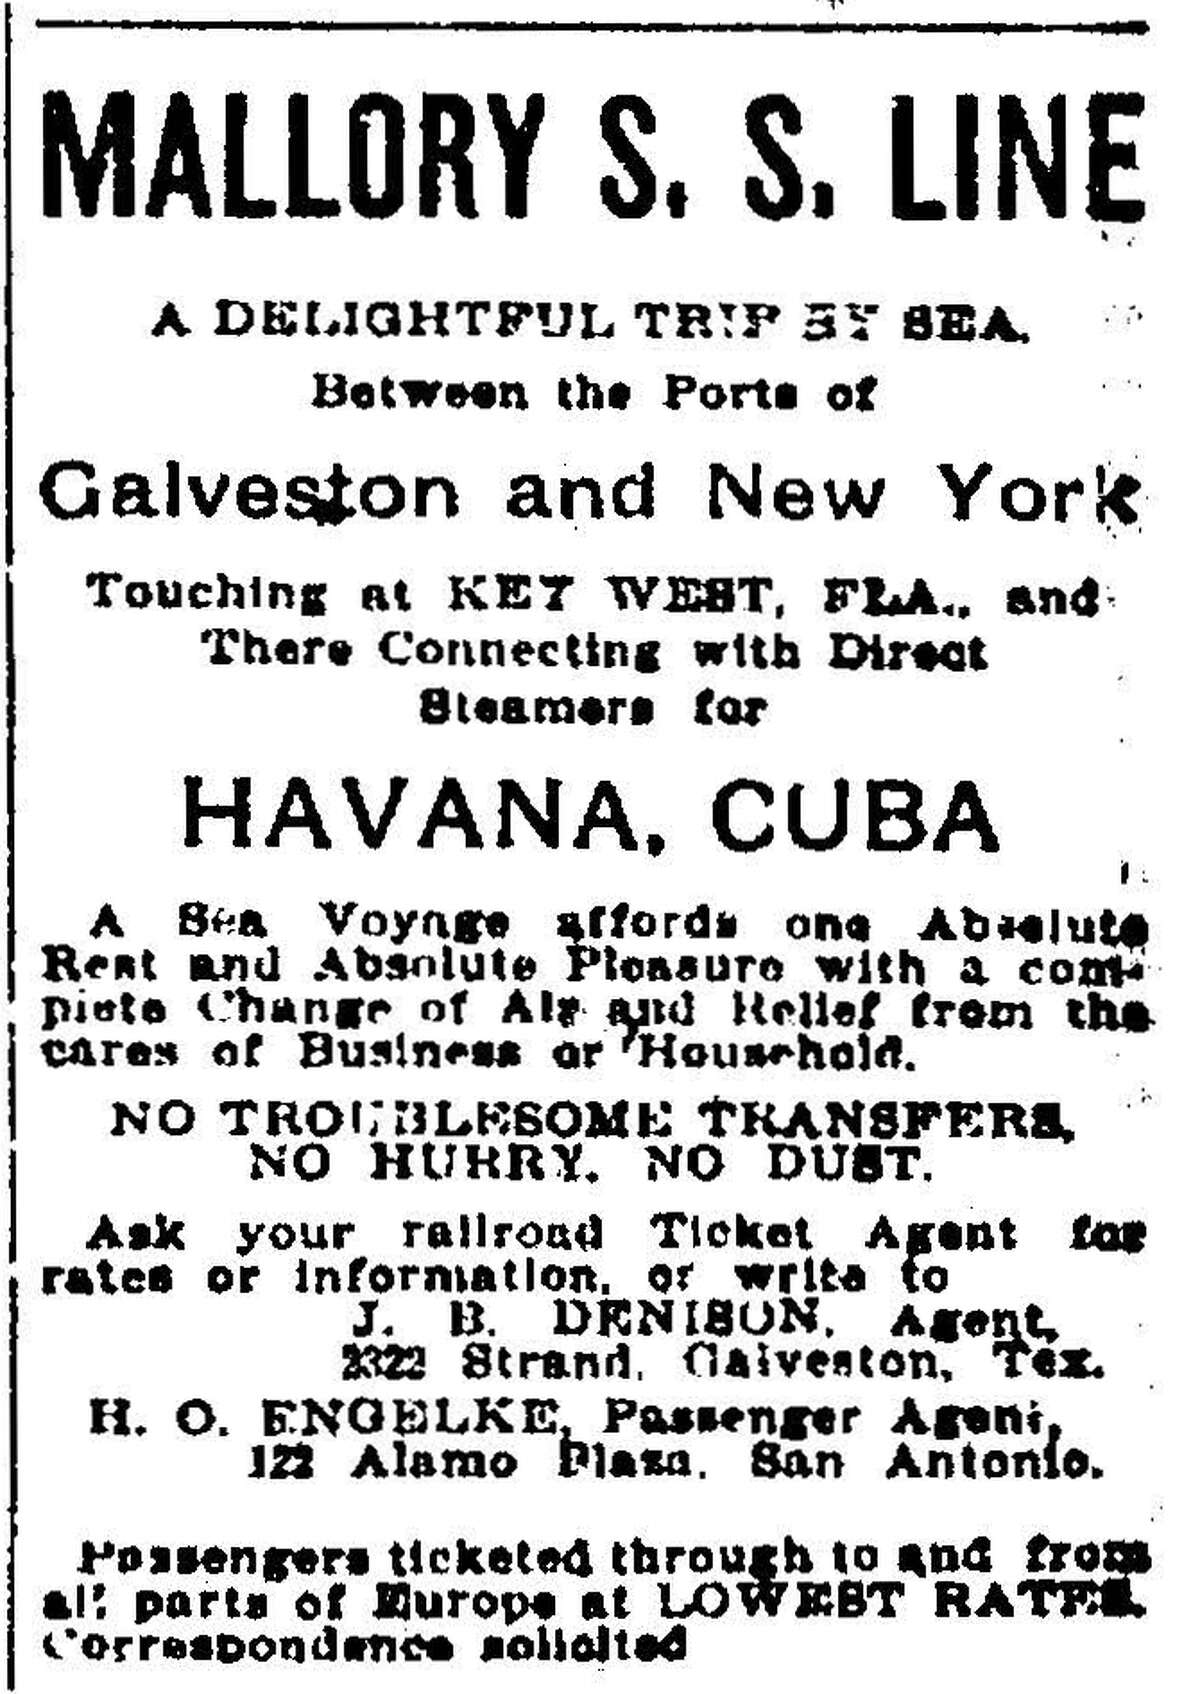 The Mallory S.S. Line was planning excursions from Galveston to Cuba, Florida and New York, according to the ad that appeared on the Dec. 9, 1900, front page, which also carried headlines about the hurricane that did tremendous damage to Galveston